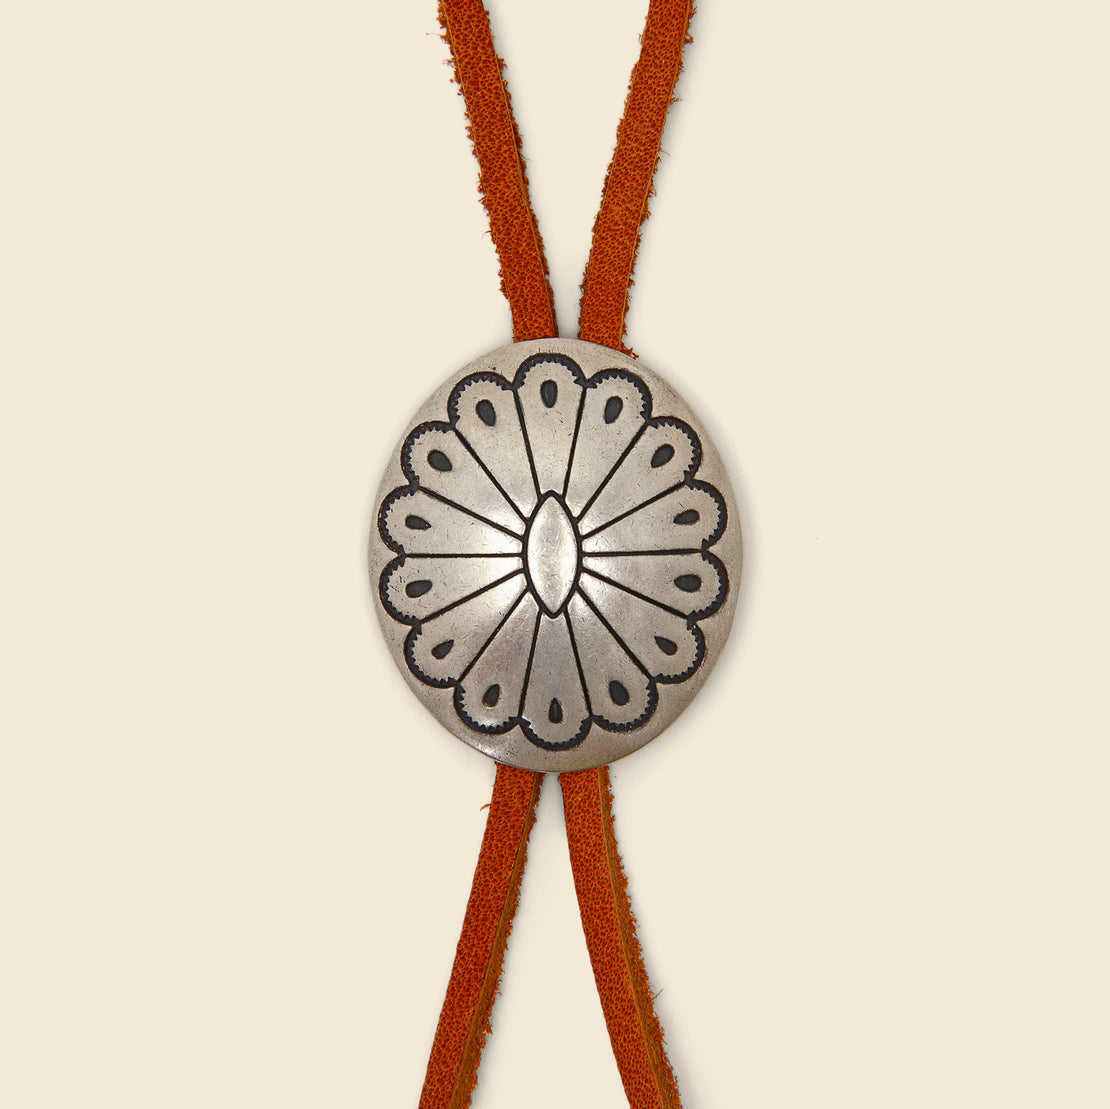 Leather Bolo Tie with Concho - Brown & Flower Design